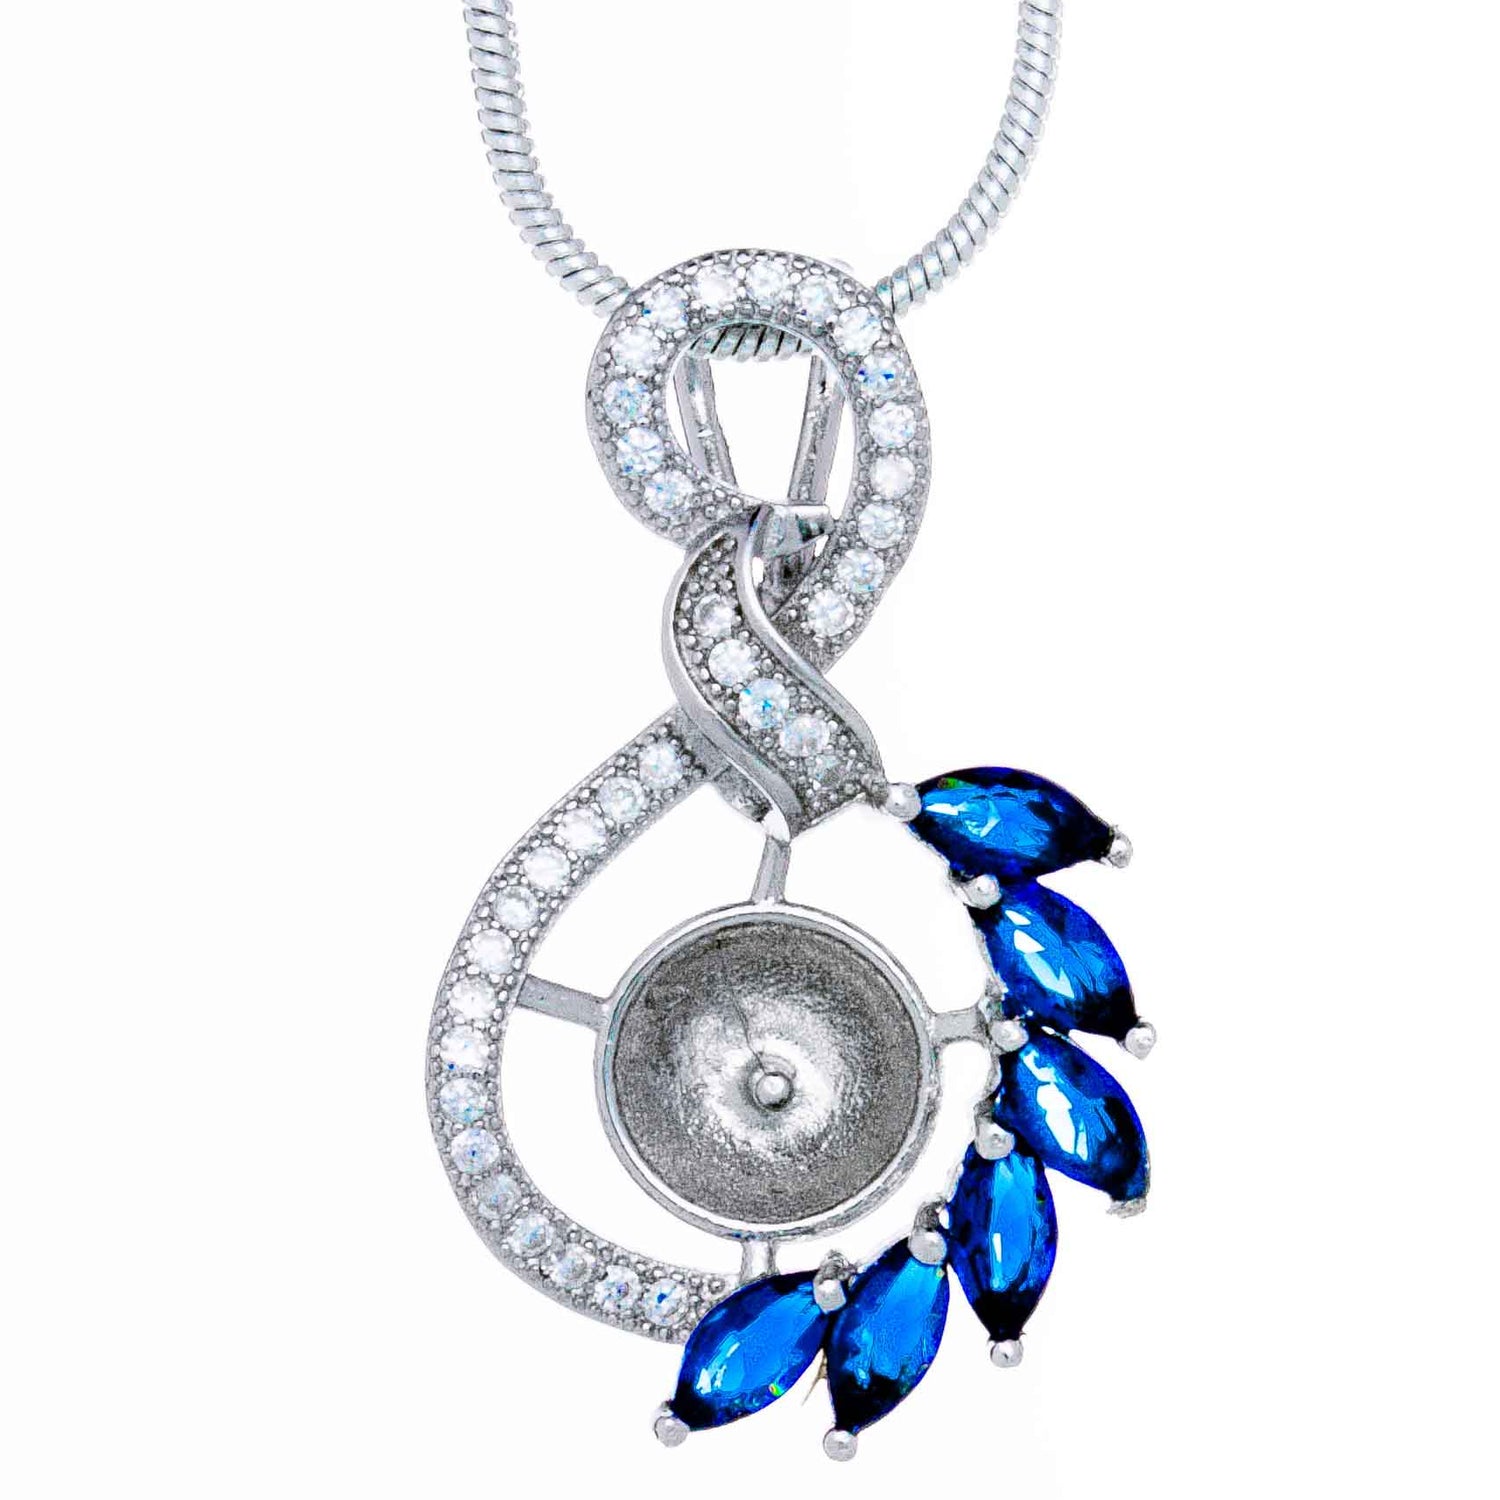 DIY Mount Pendant - 925 Sterling Silver Twisted Blue Zircon Crystals